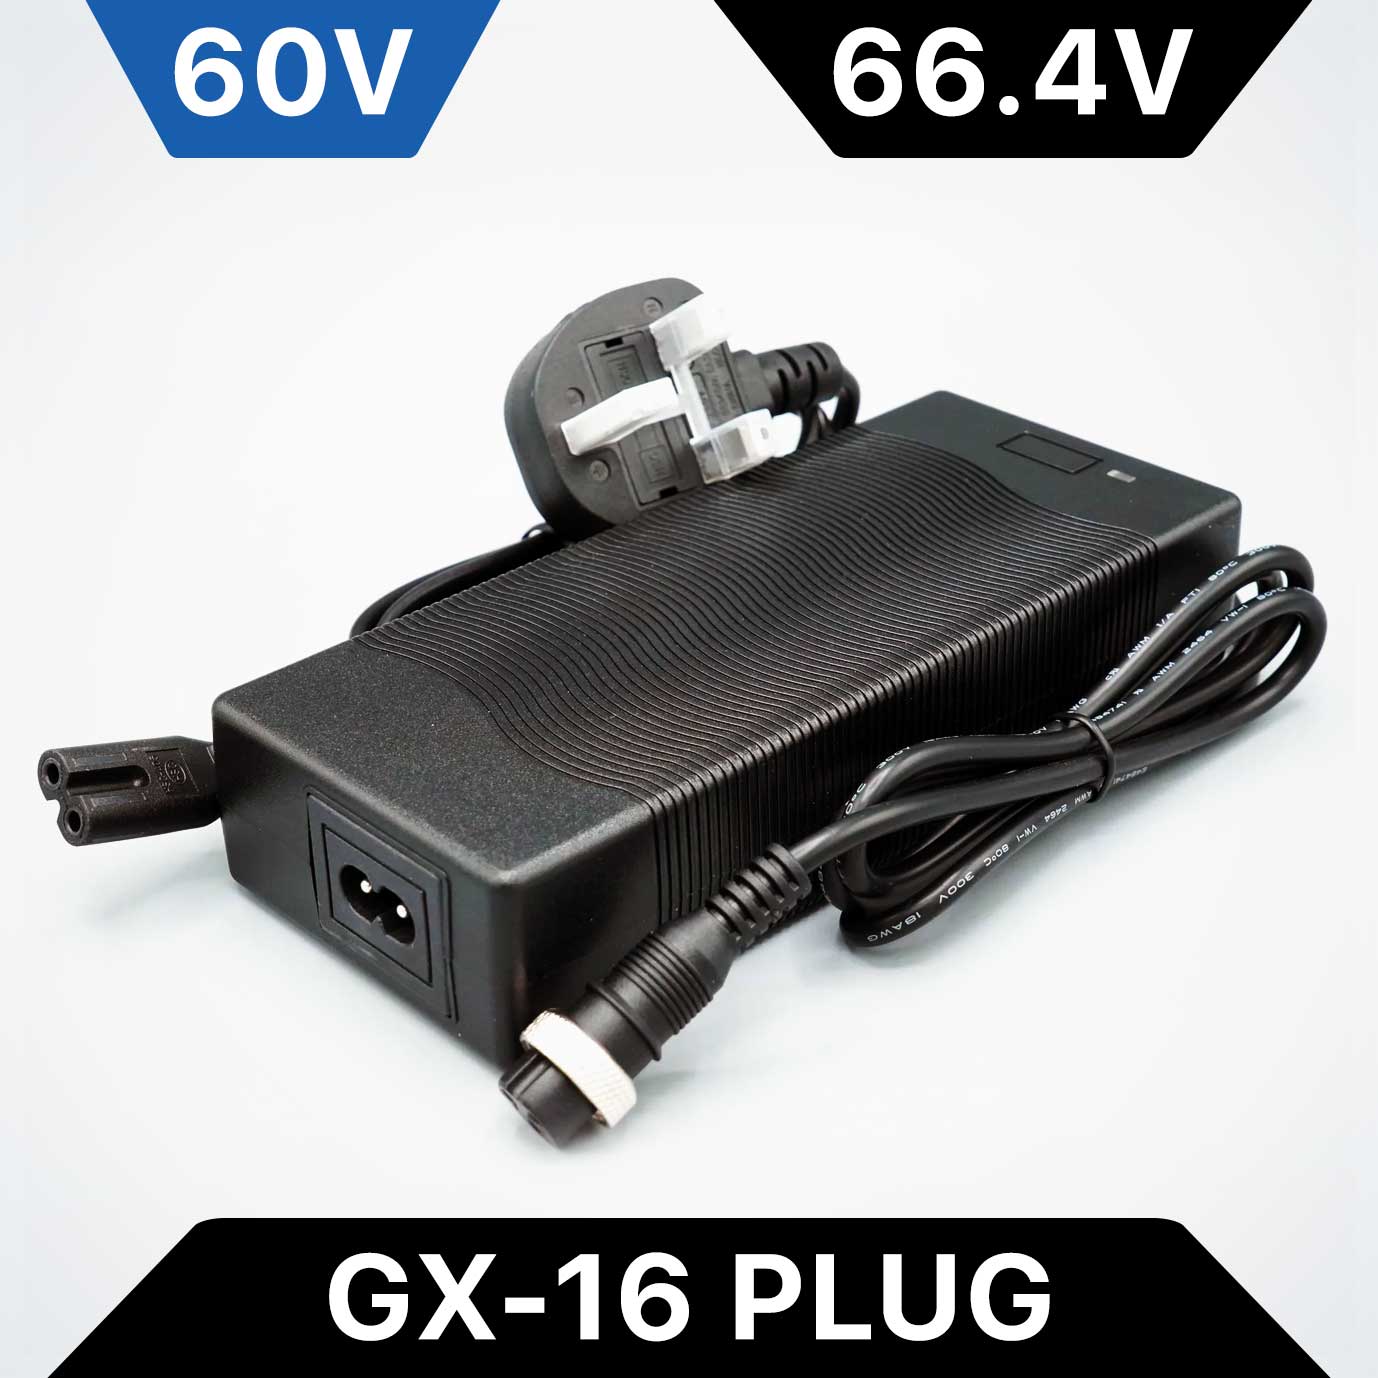 60V 1.75A Slow Charger for Dualtron, 66.4V Max, GX16 Plug